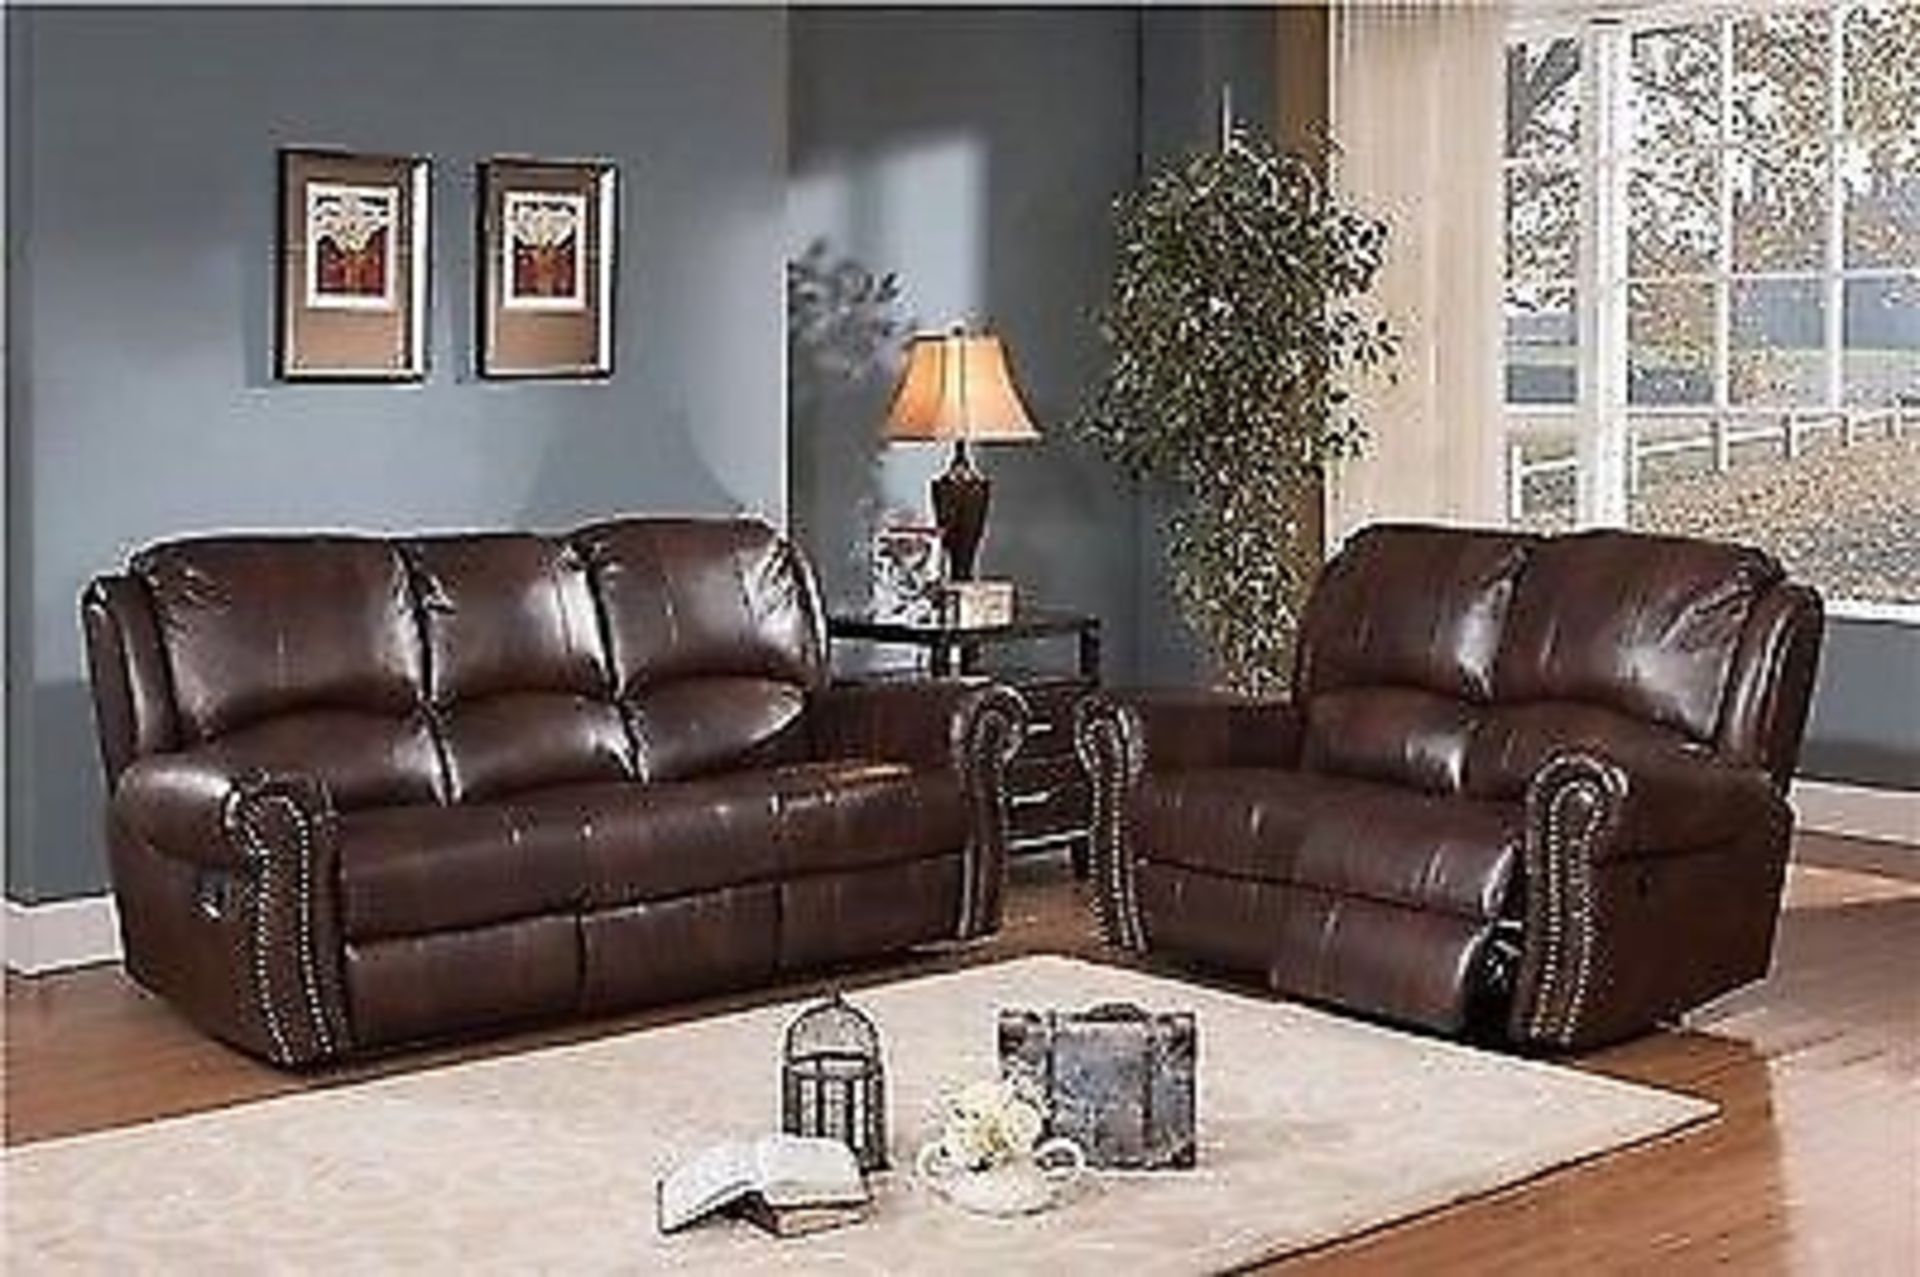 Brand New 3 Seater Plus 3 Seater Salisbury Deluxe Brown Leather Reclining Sofas